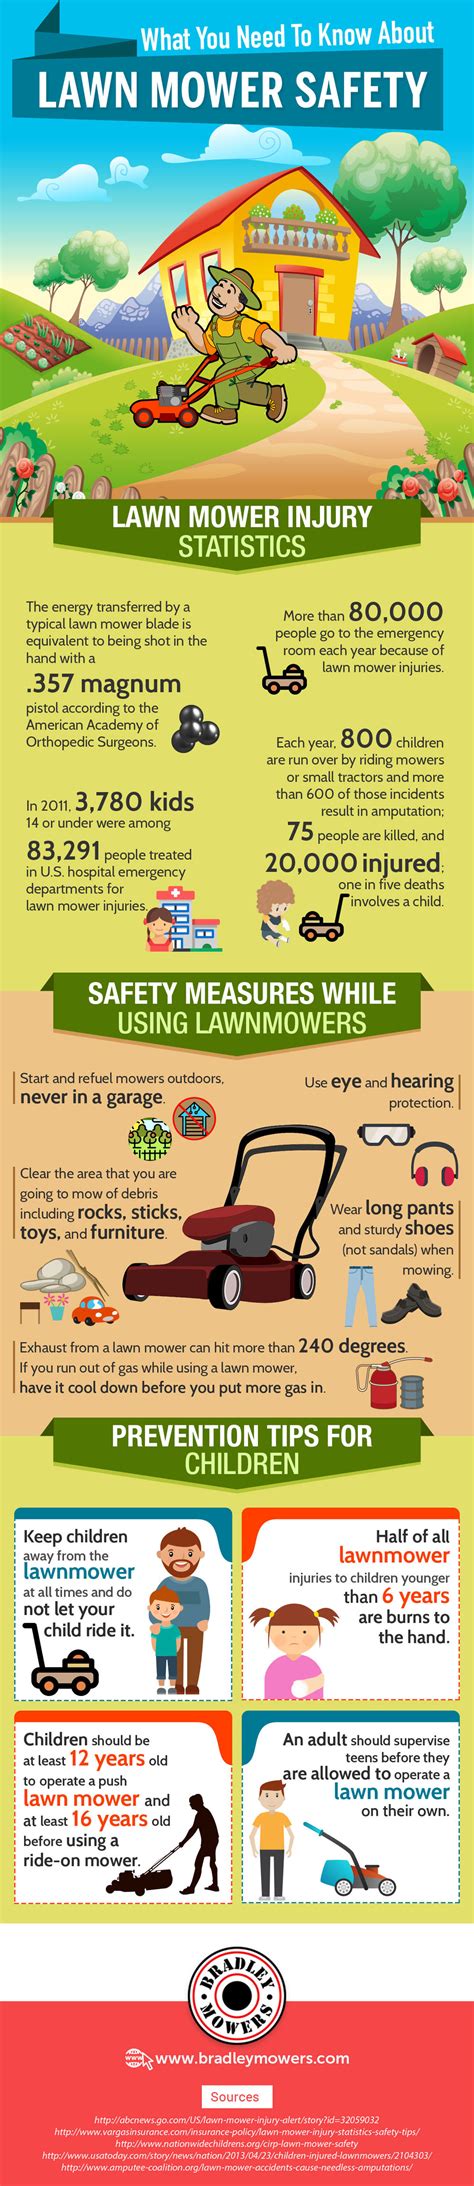 Lawn Mower Safety Infographic